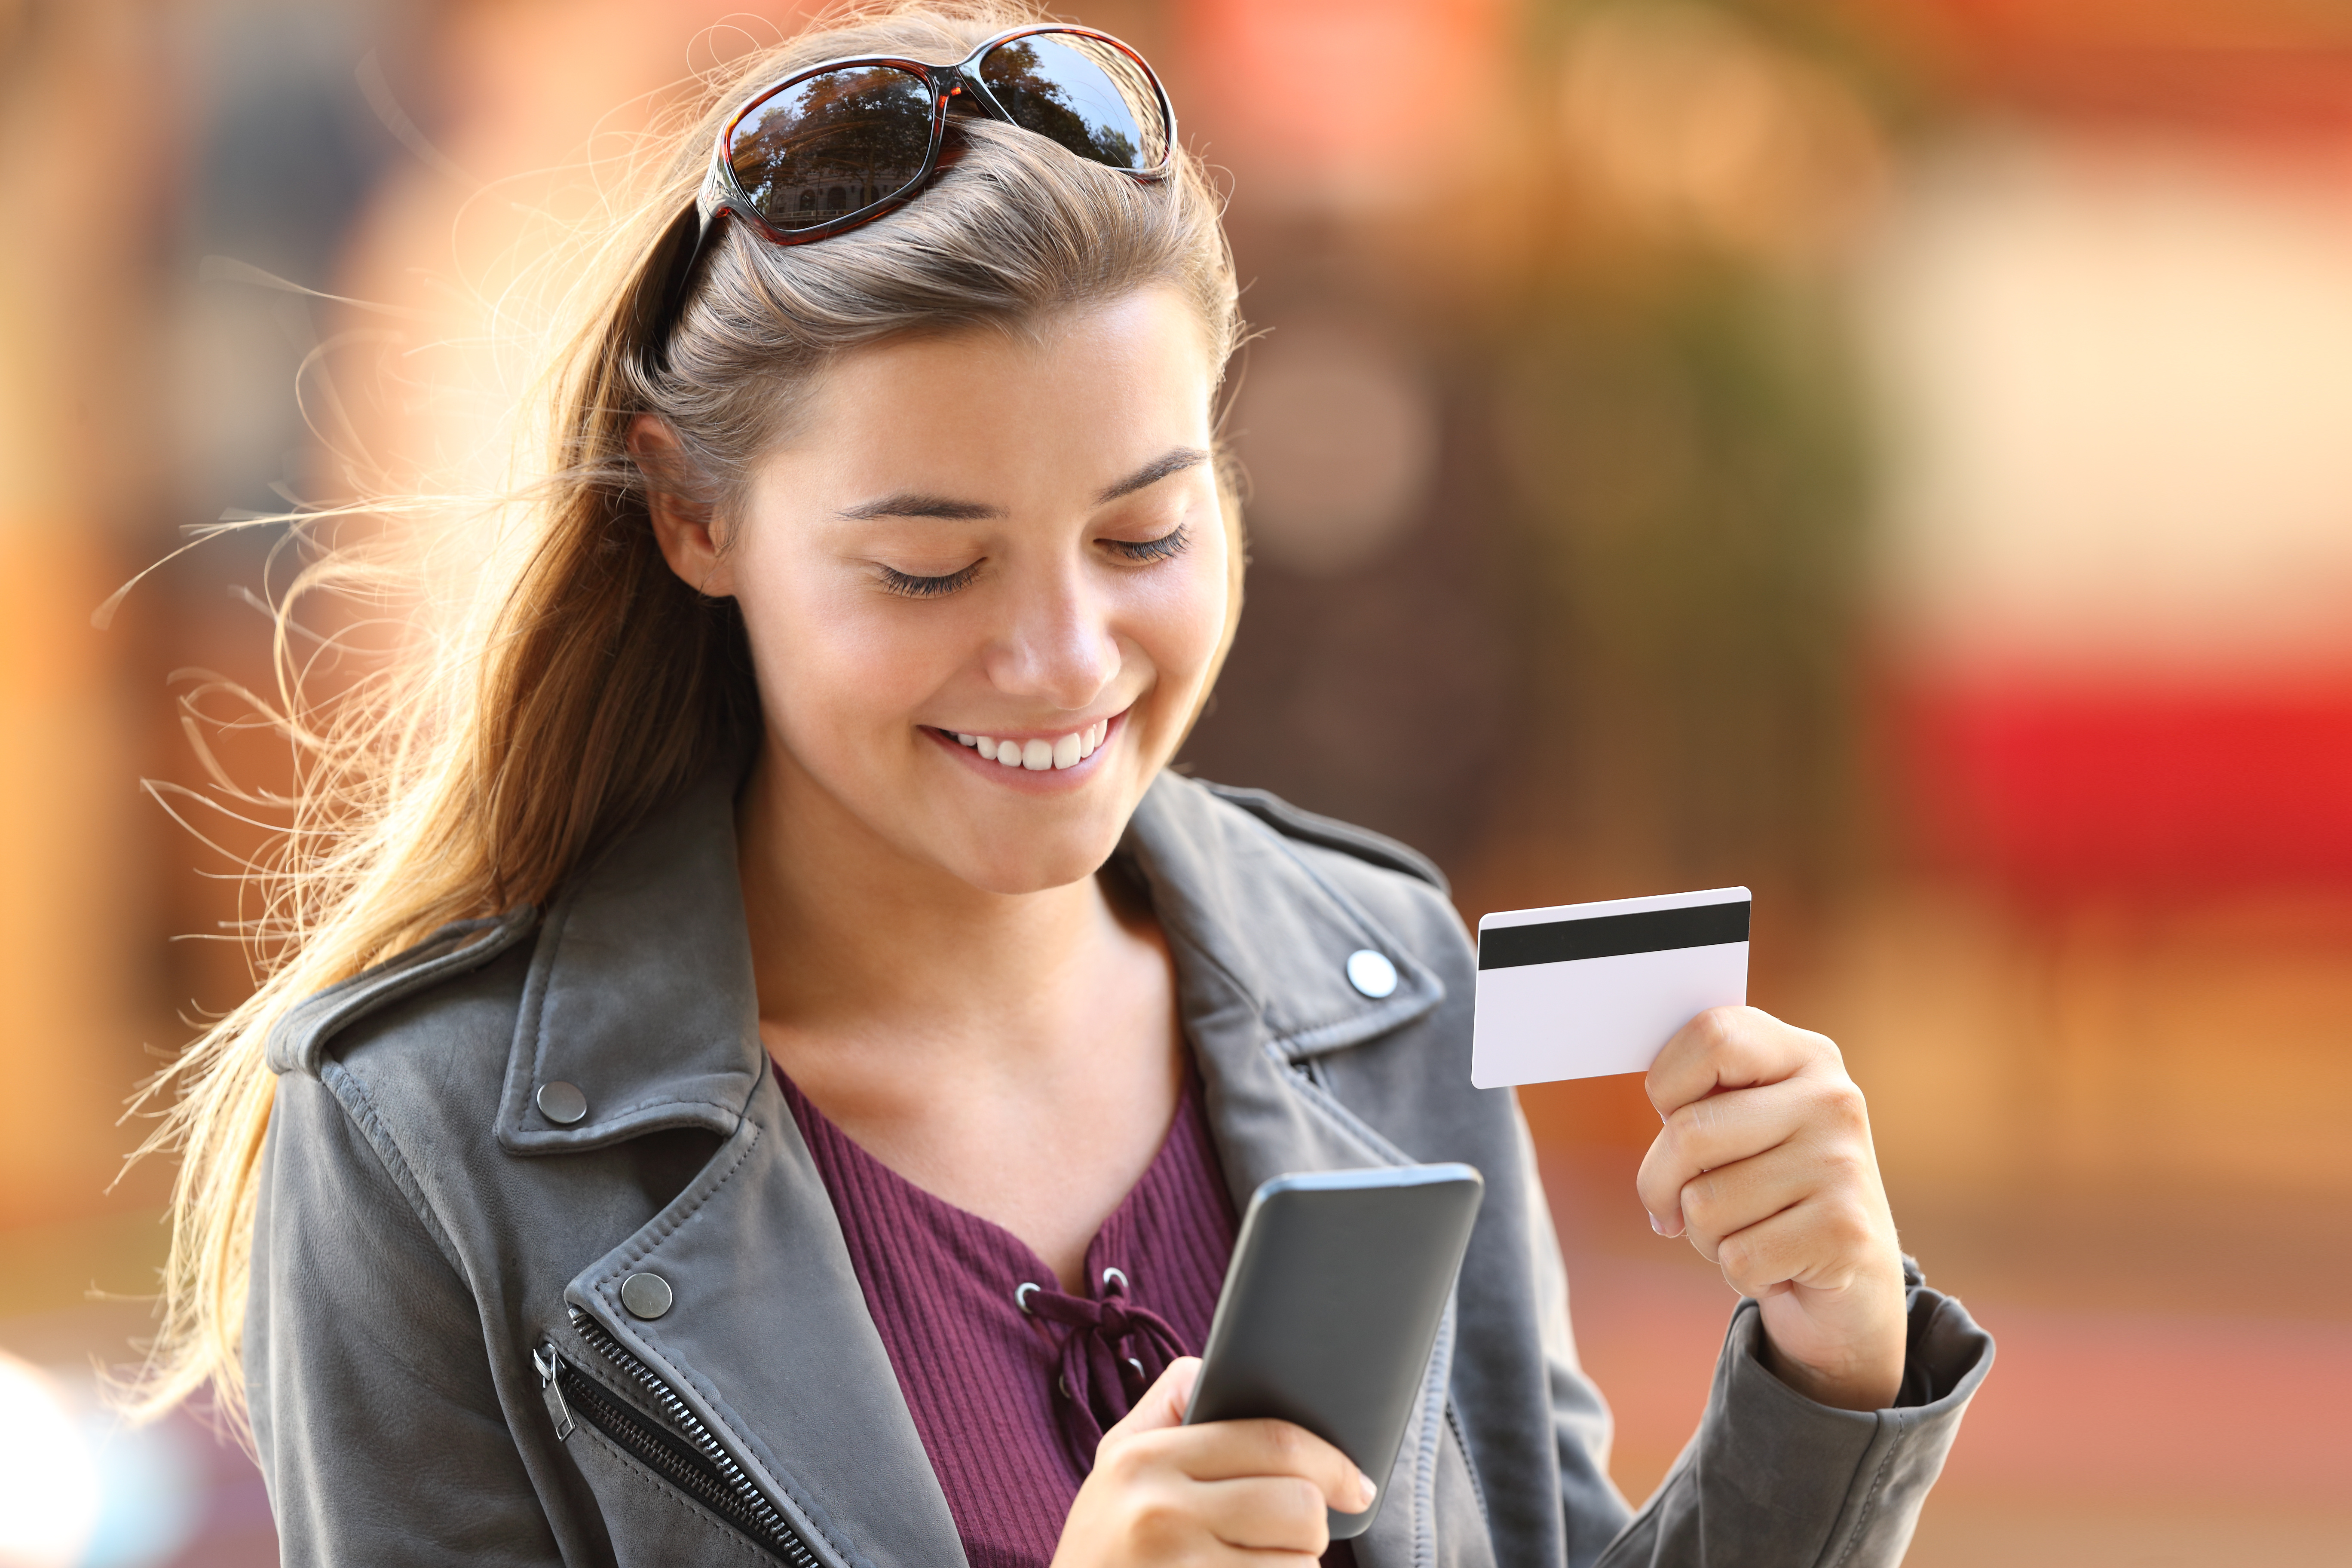 teen girl smiling at phone holding debit card